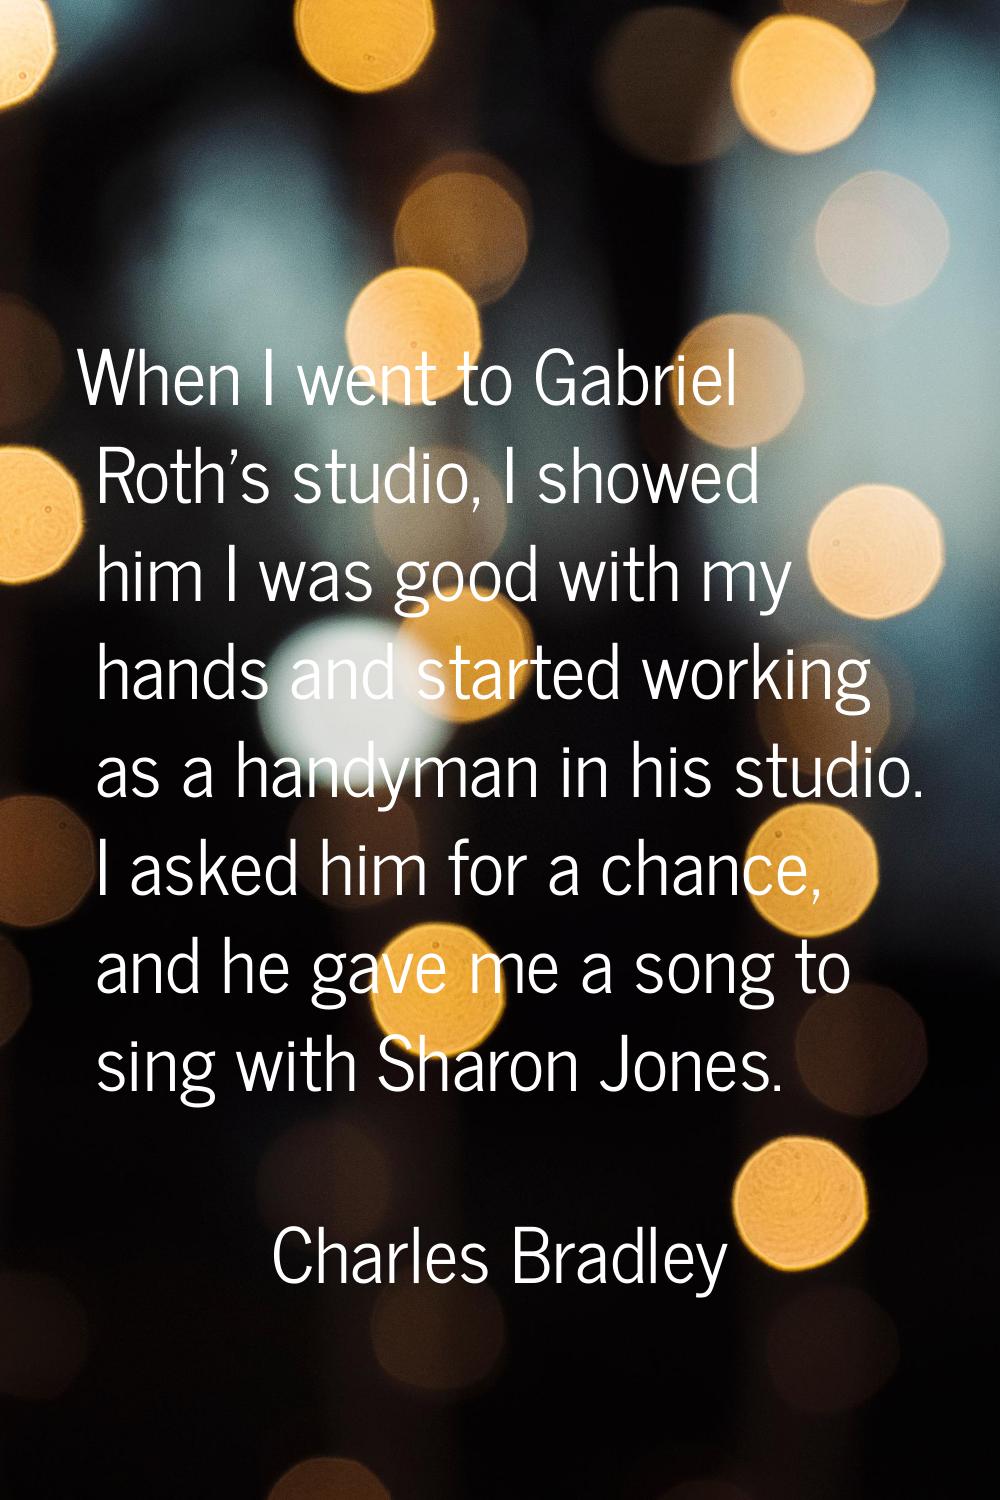 When I went to Gabriel Roth's studio, I showed him I was good with my hands and started working as 